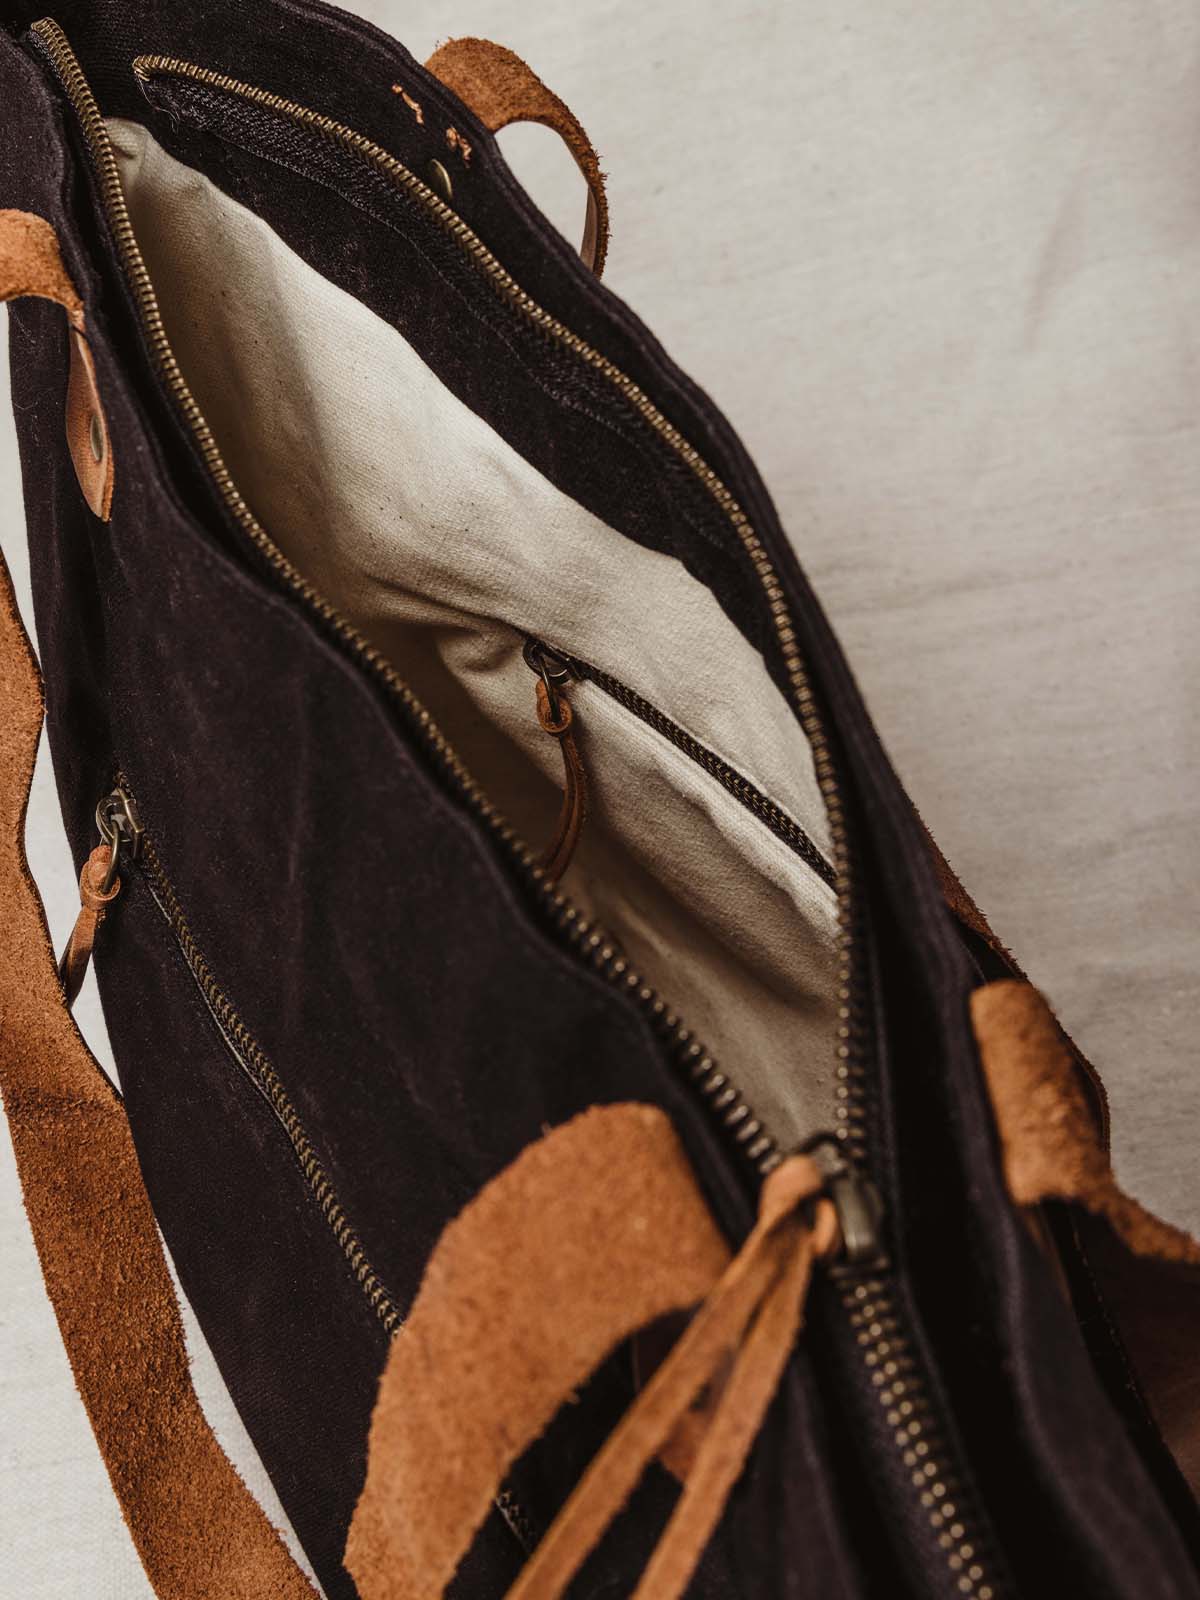 Closeup image of bags details. High quality leather and one internal and one external zipper for additional storage.